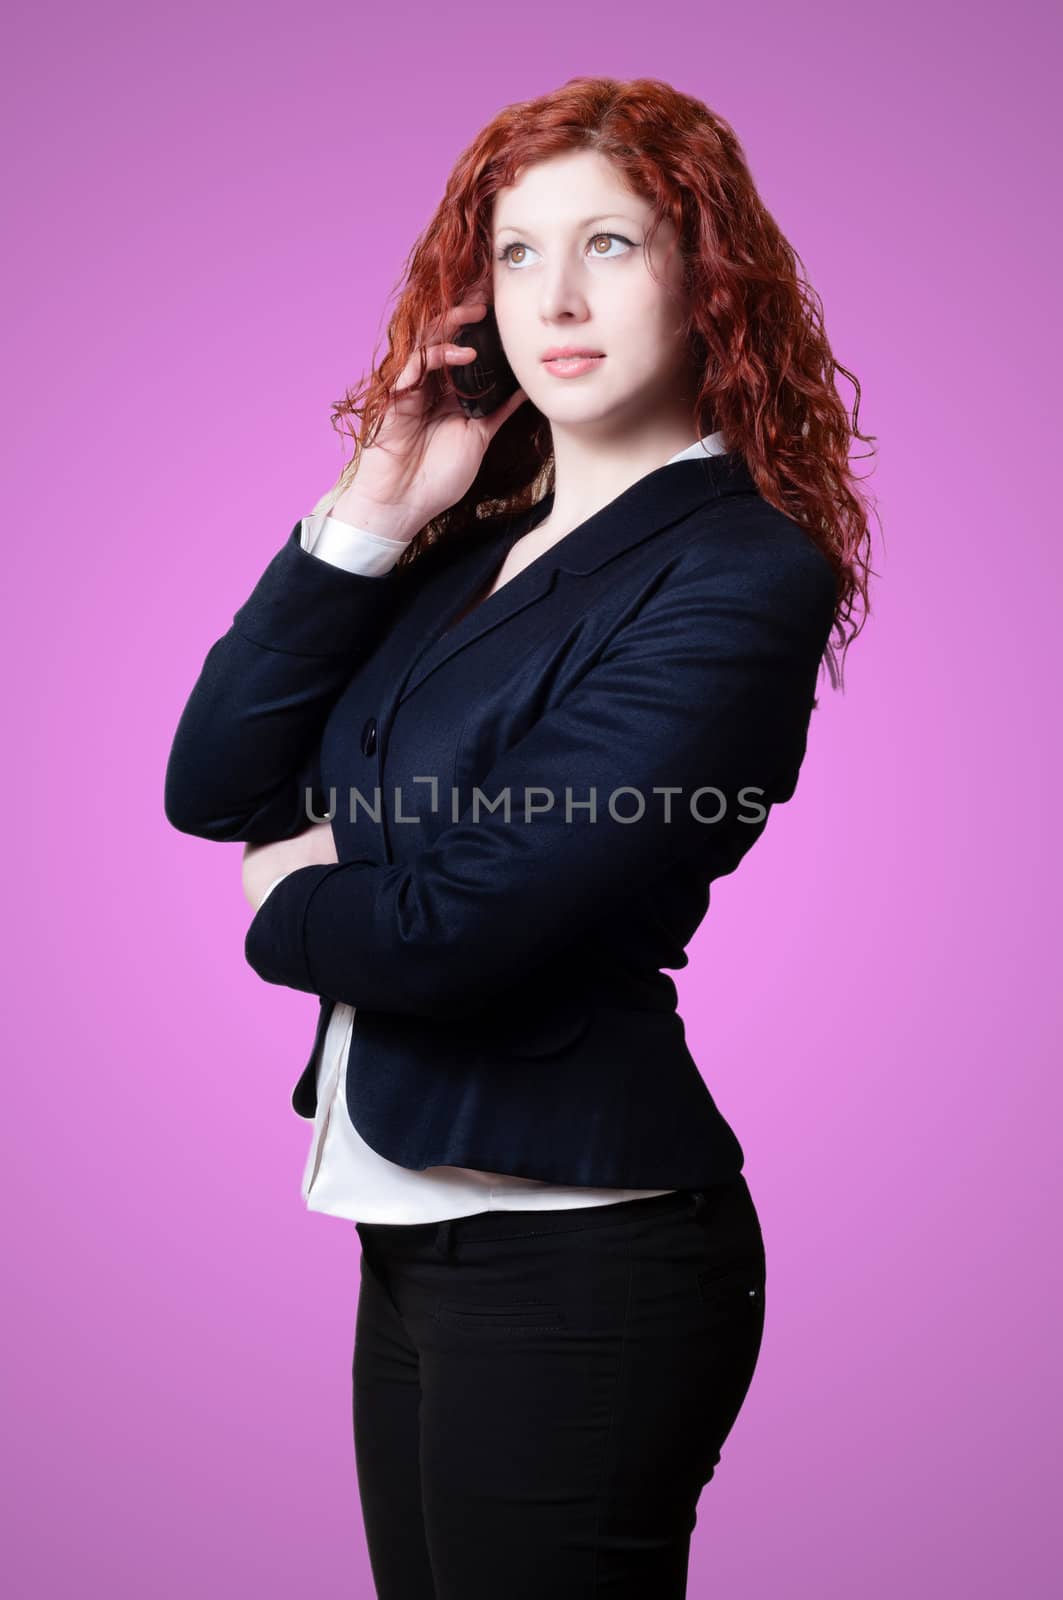 long red hair businesswoman on the phone on pink background